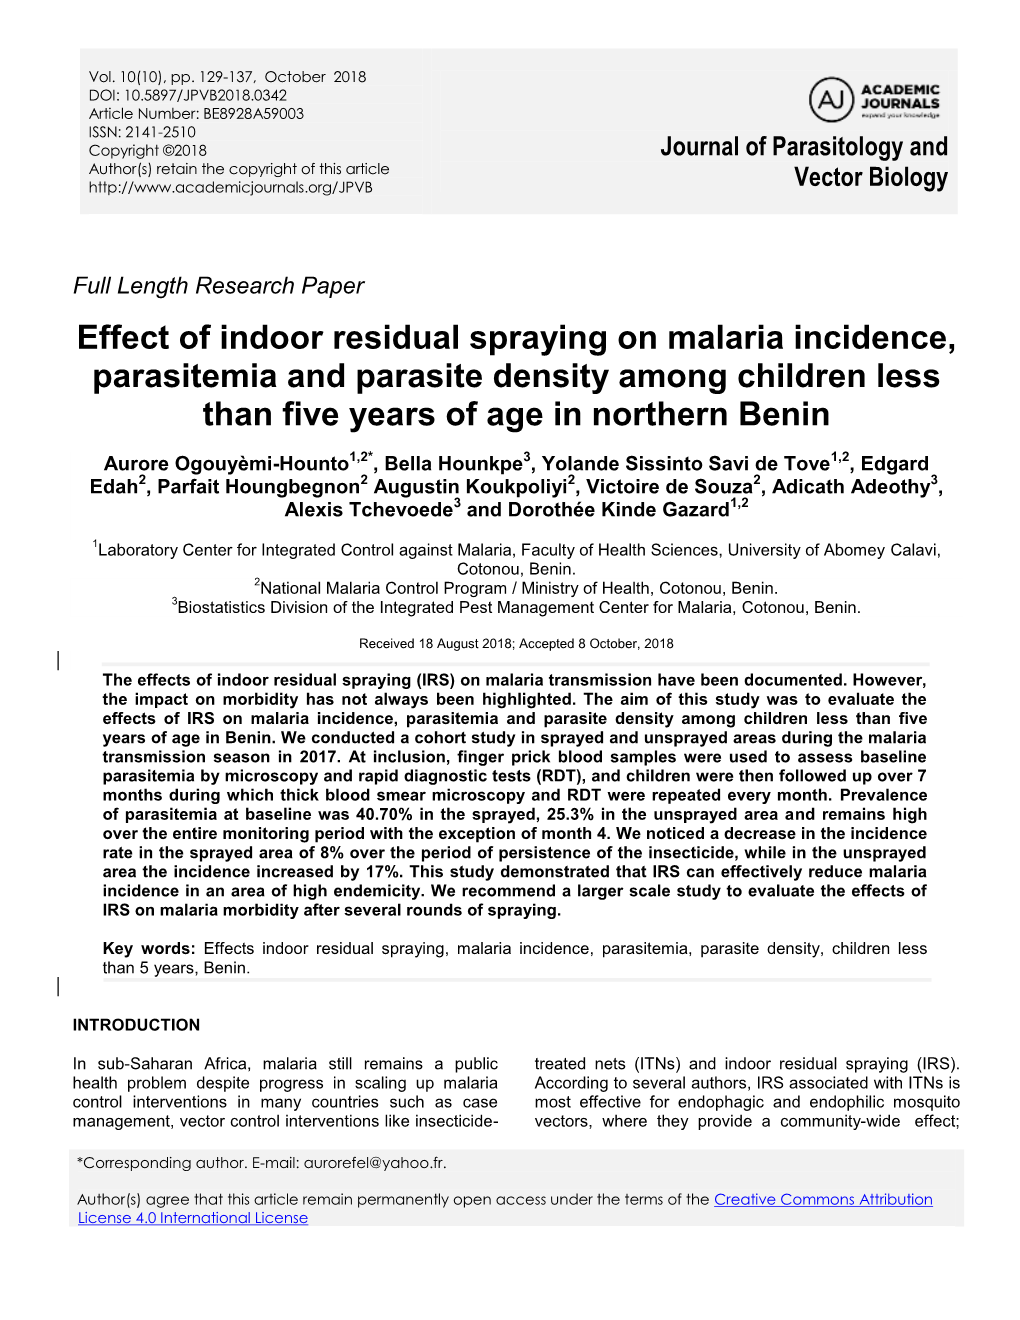 Effect of Indoor Residual Spraying on Malaria Incidence, Parasitemia and Parasite Density Among Children Less Than Five Years of Age in Northern Benin